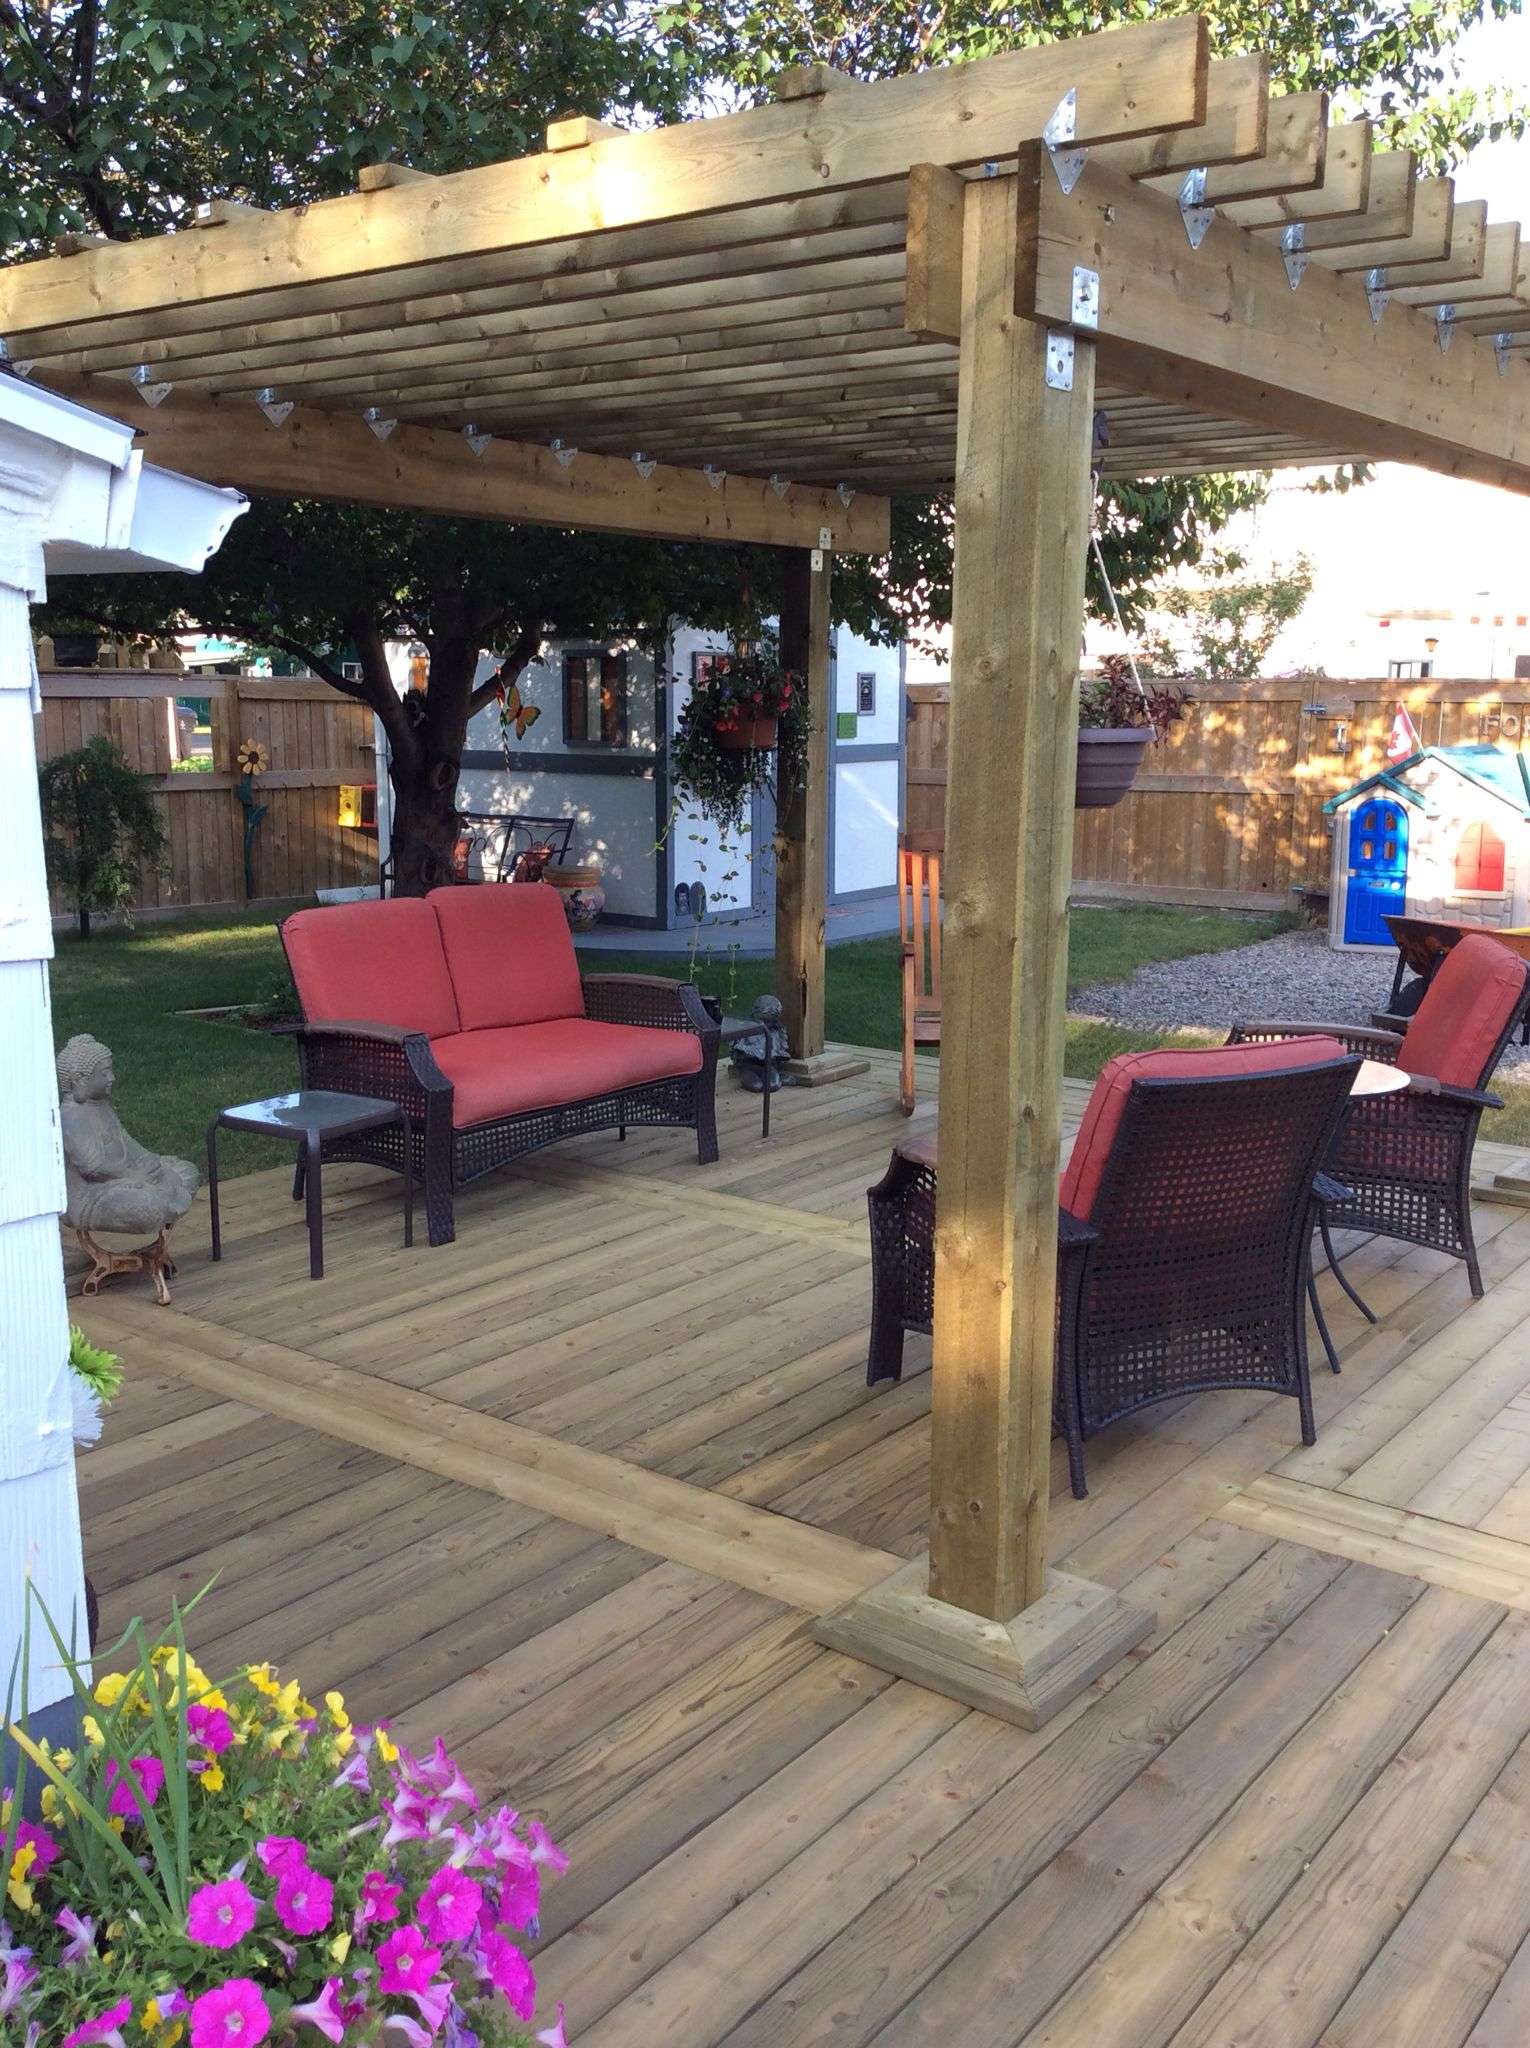 My husband built this awesome pergola.